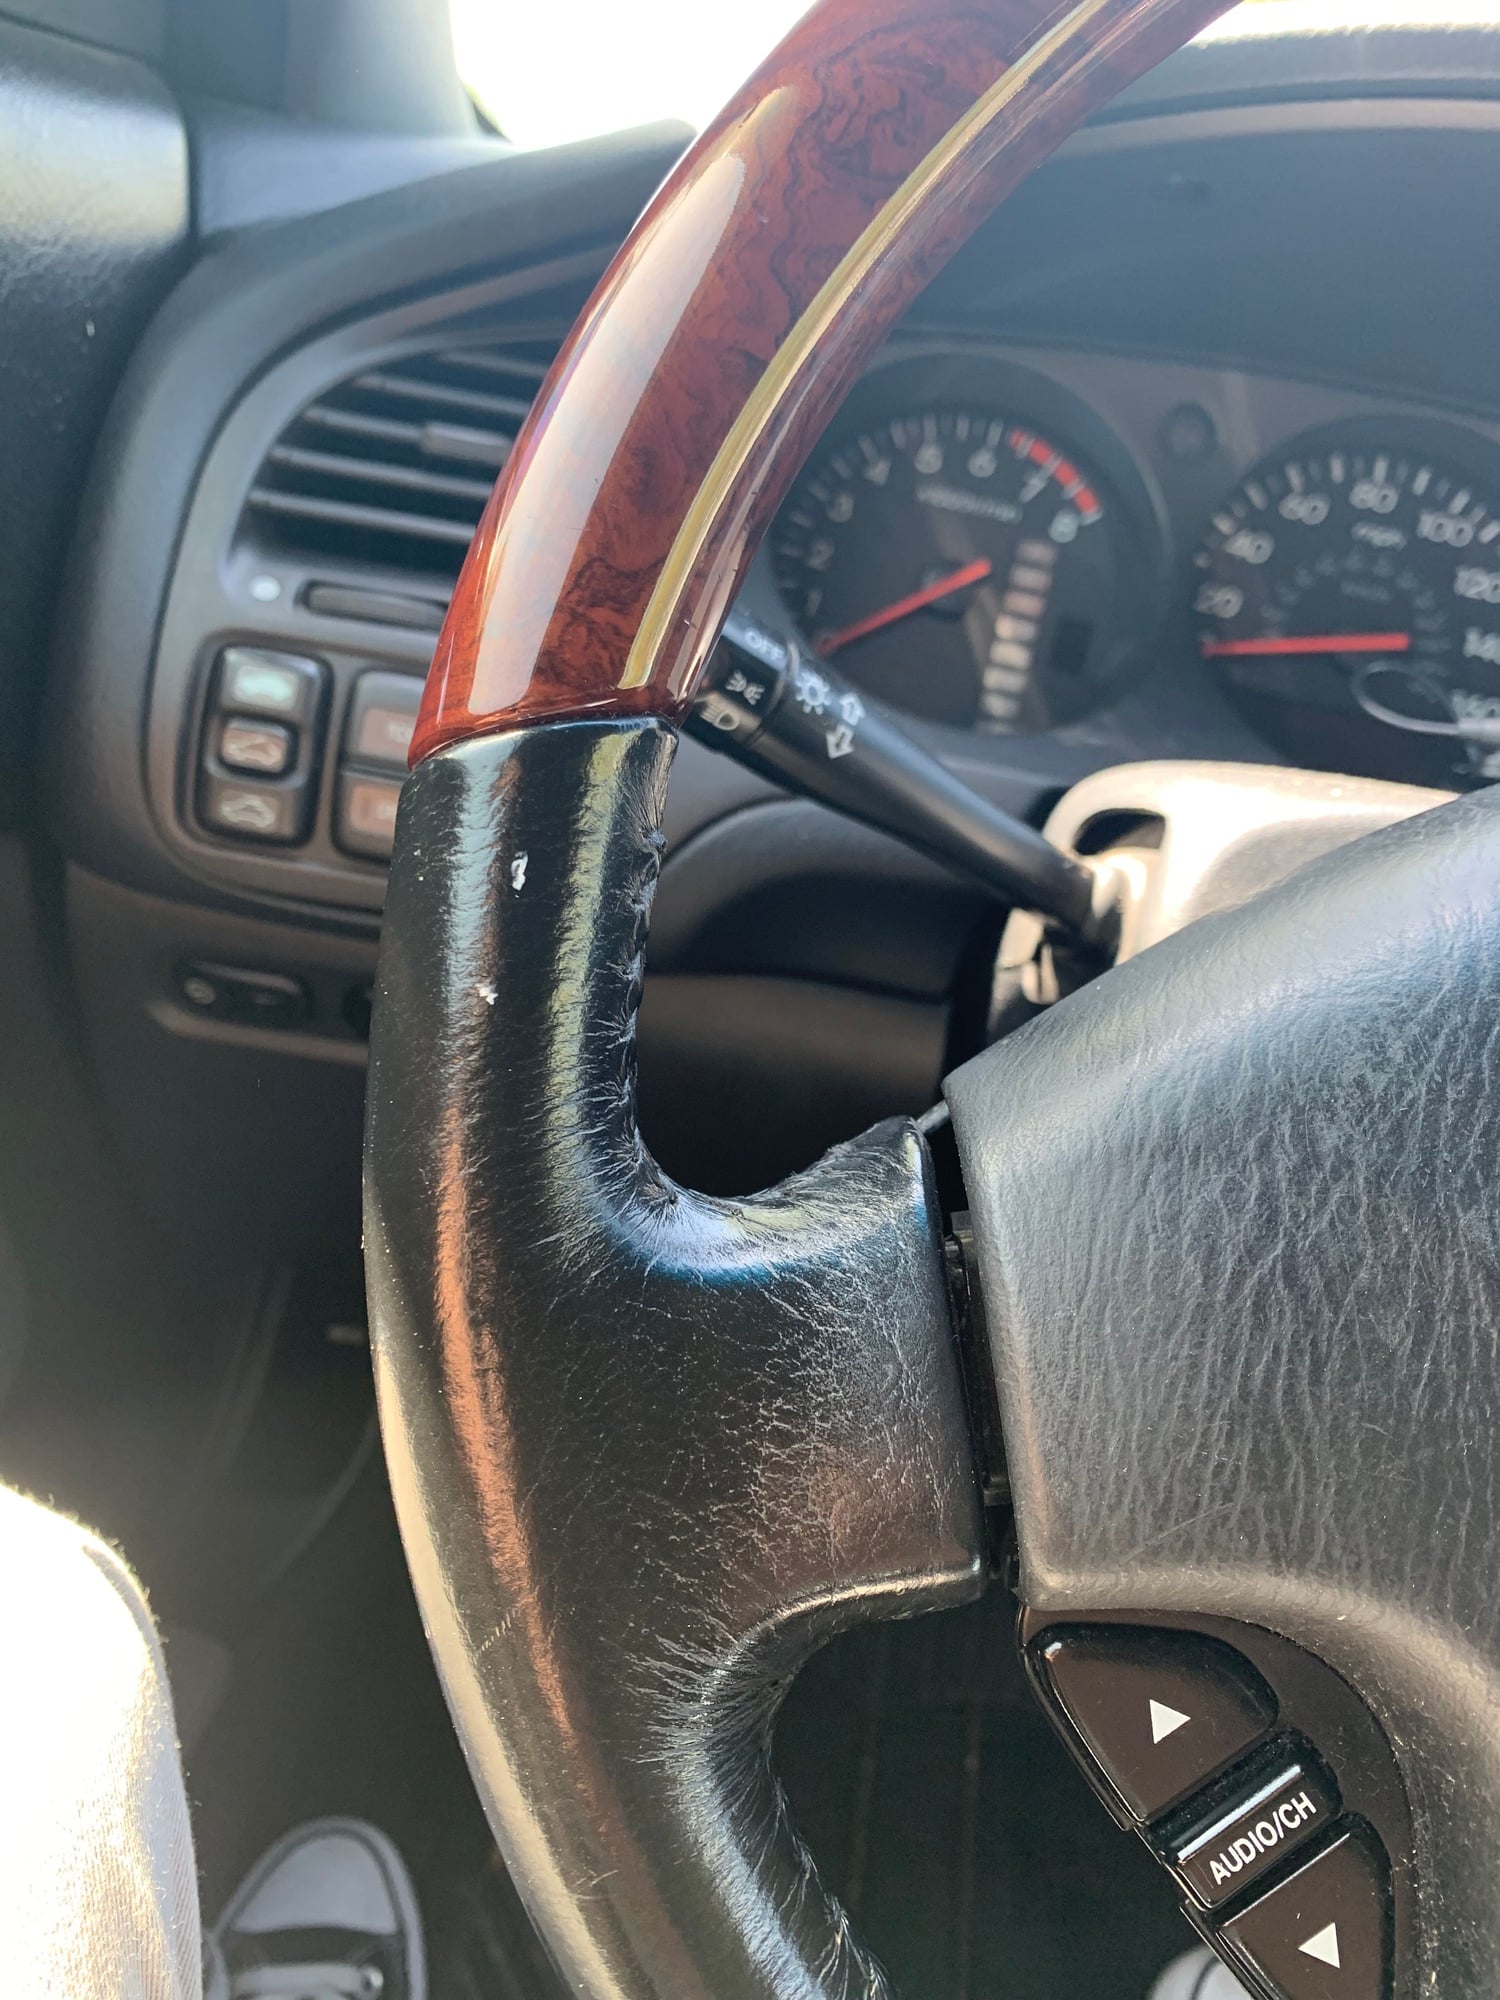 Interior/Upholstery - FS: Wood grain steering wheels 2G TL - Used - 1999 to 2003 Acura TL - Sacramento, CA 95828, United States